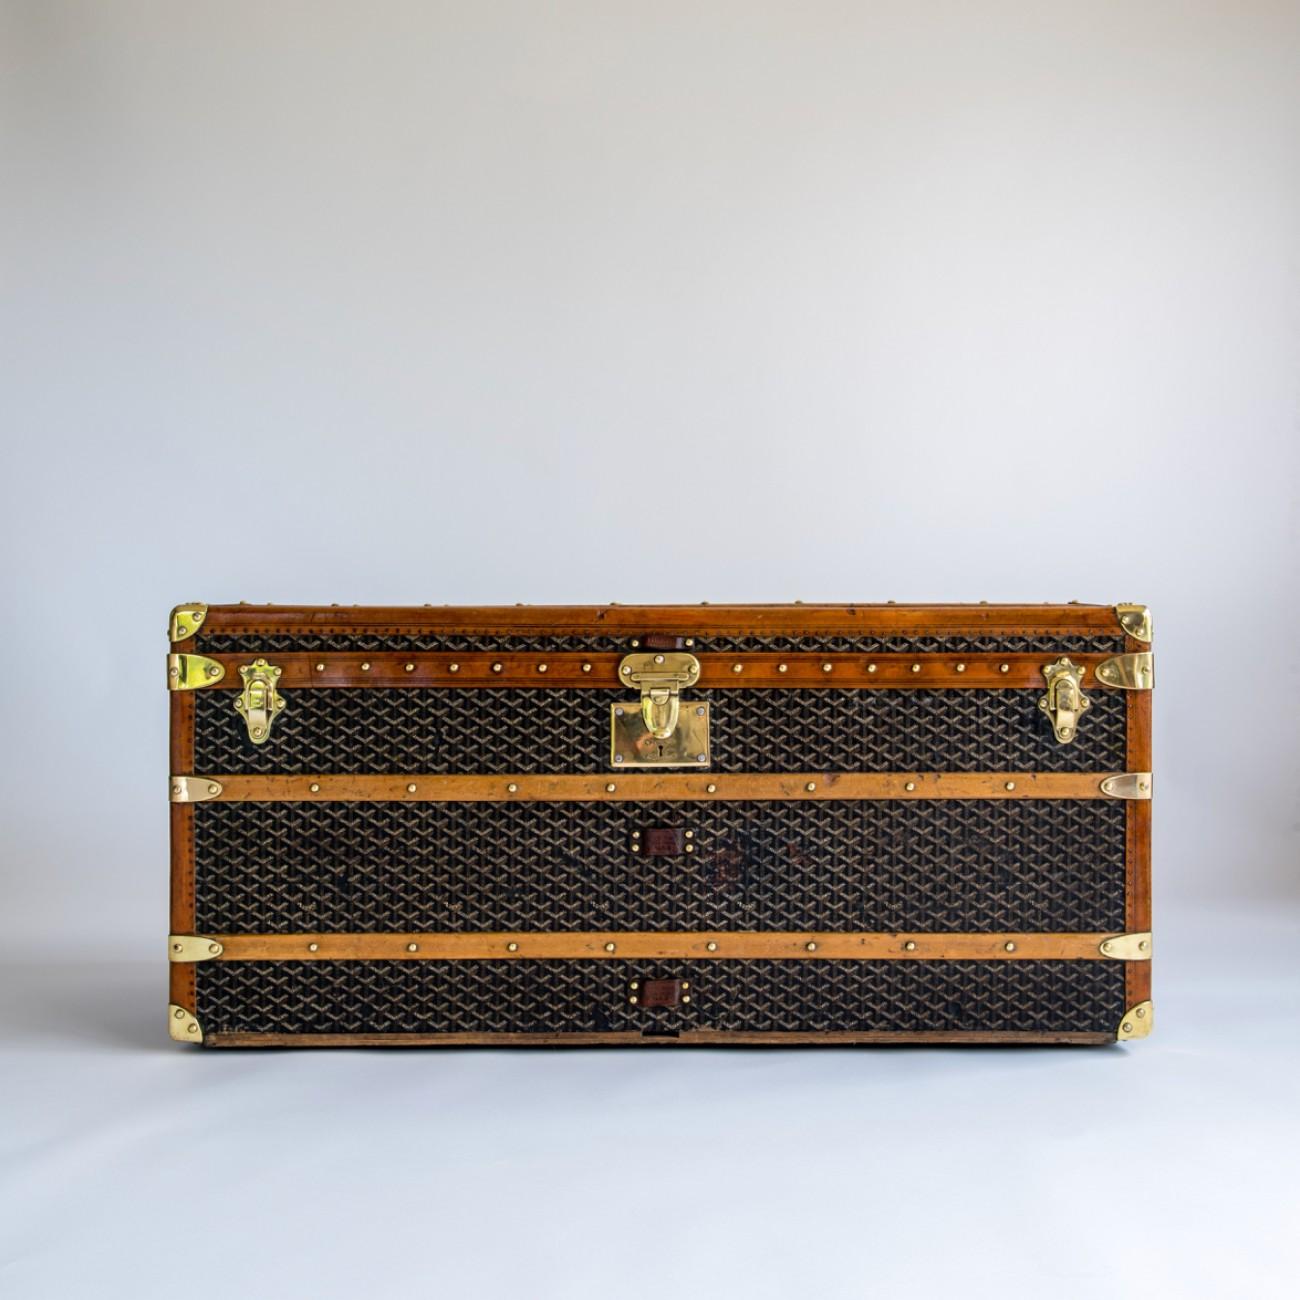 A splendid steamer trunk by Goyard with chevron pattern canvas (Goyardene) covering and polished brass lock, catches & handles; circa 1915.

In 1853 François Goyard took over from Moral - a trunk maker who was trunk maker to the heir to the French